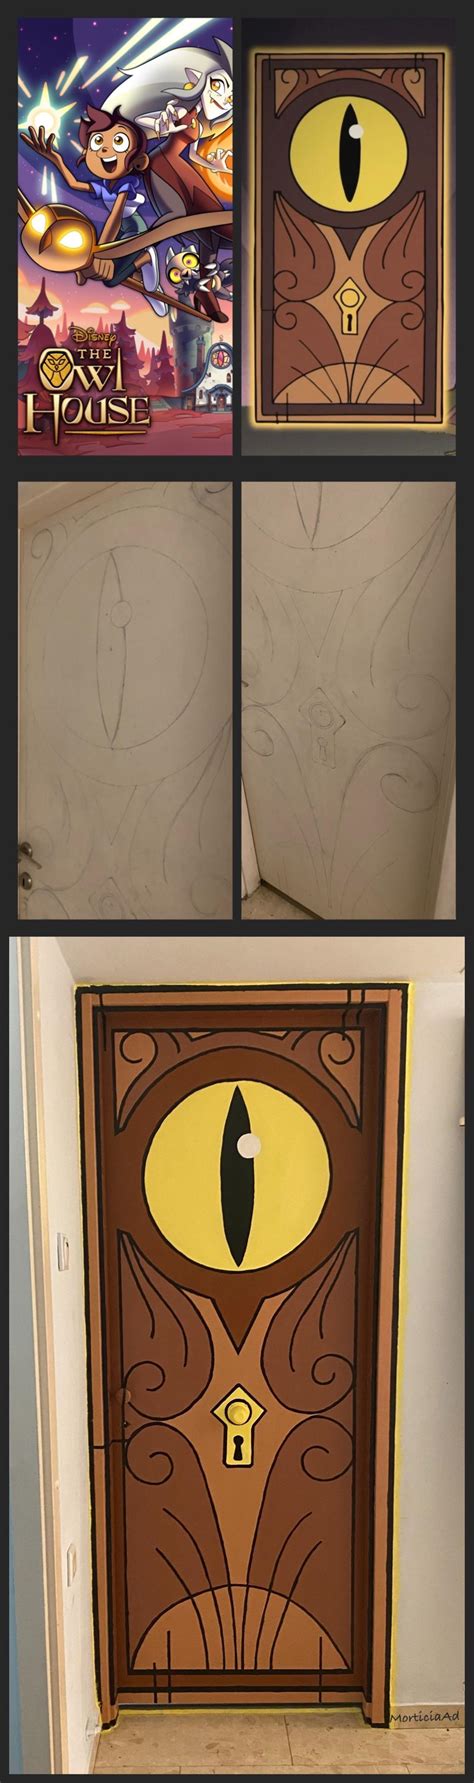 My Daughter And I Painted The Owl House Portal Door Oc R